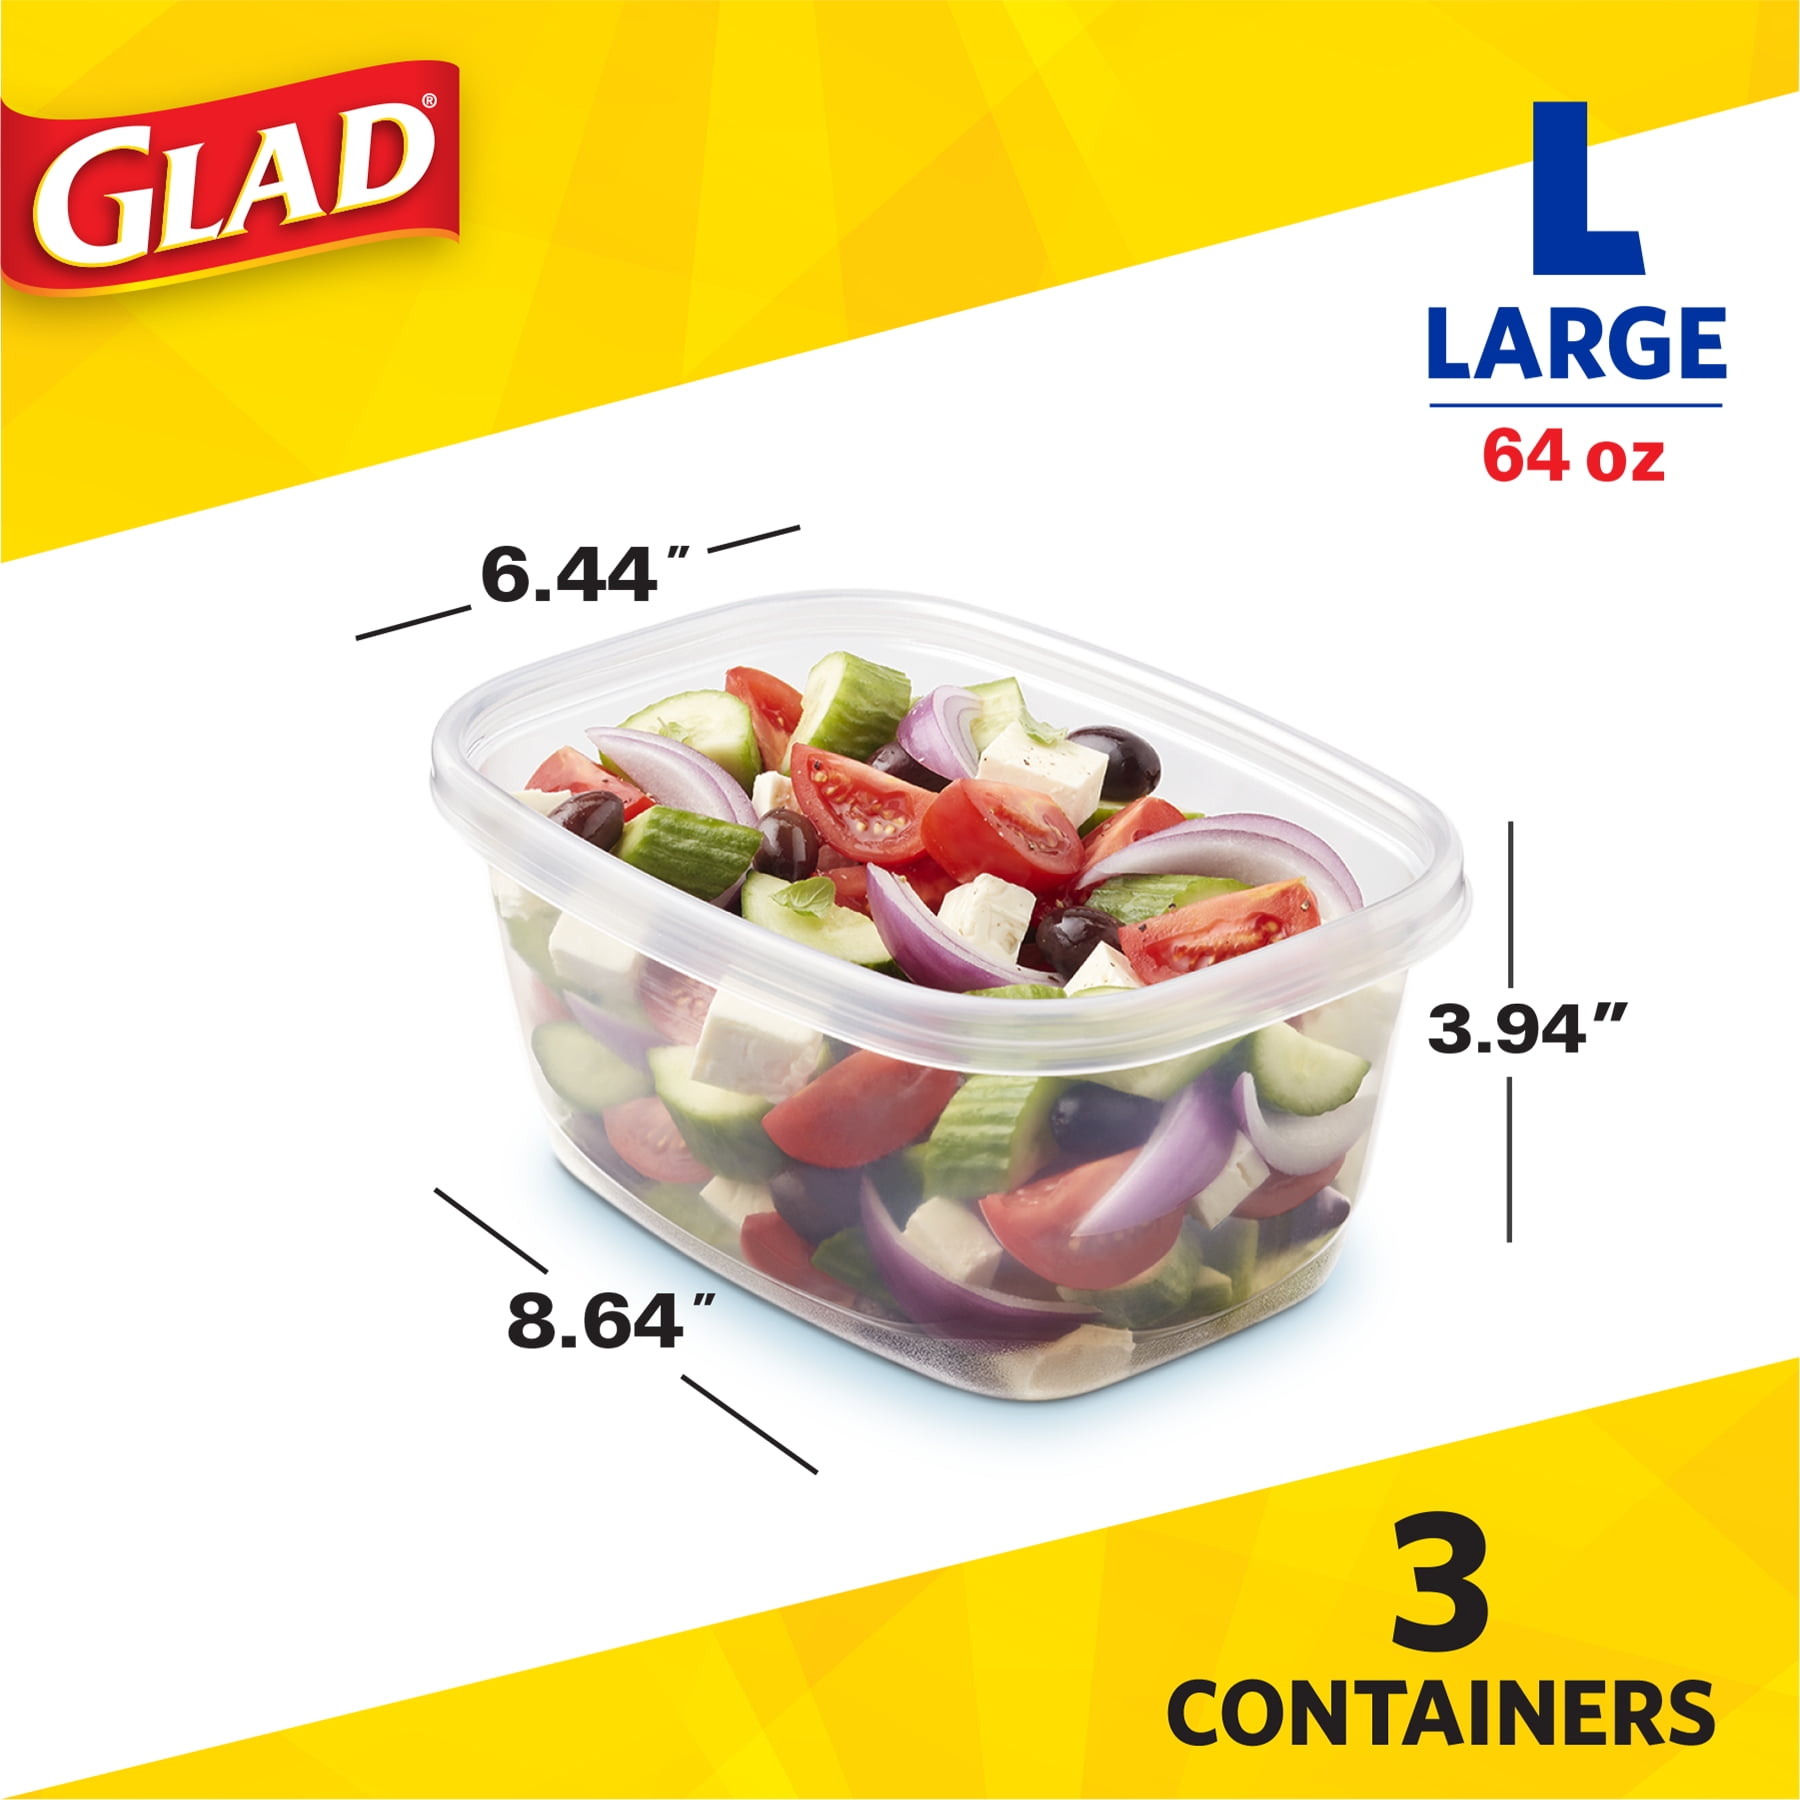 Glad Food Storage Containers - Big Bowl Container - 48 oz - 2 Containers 